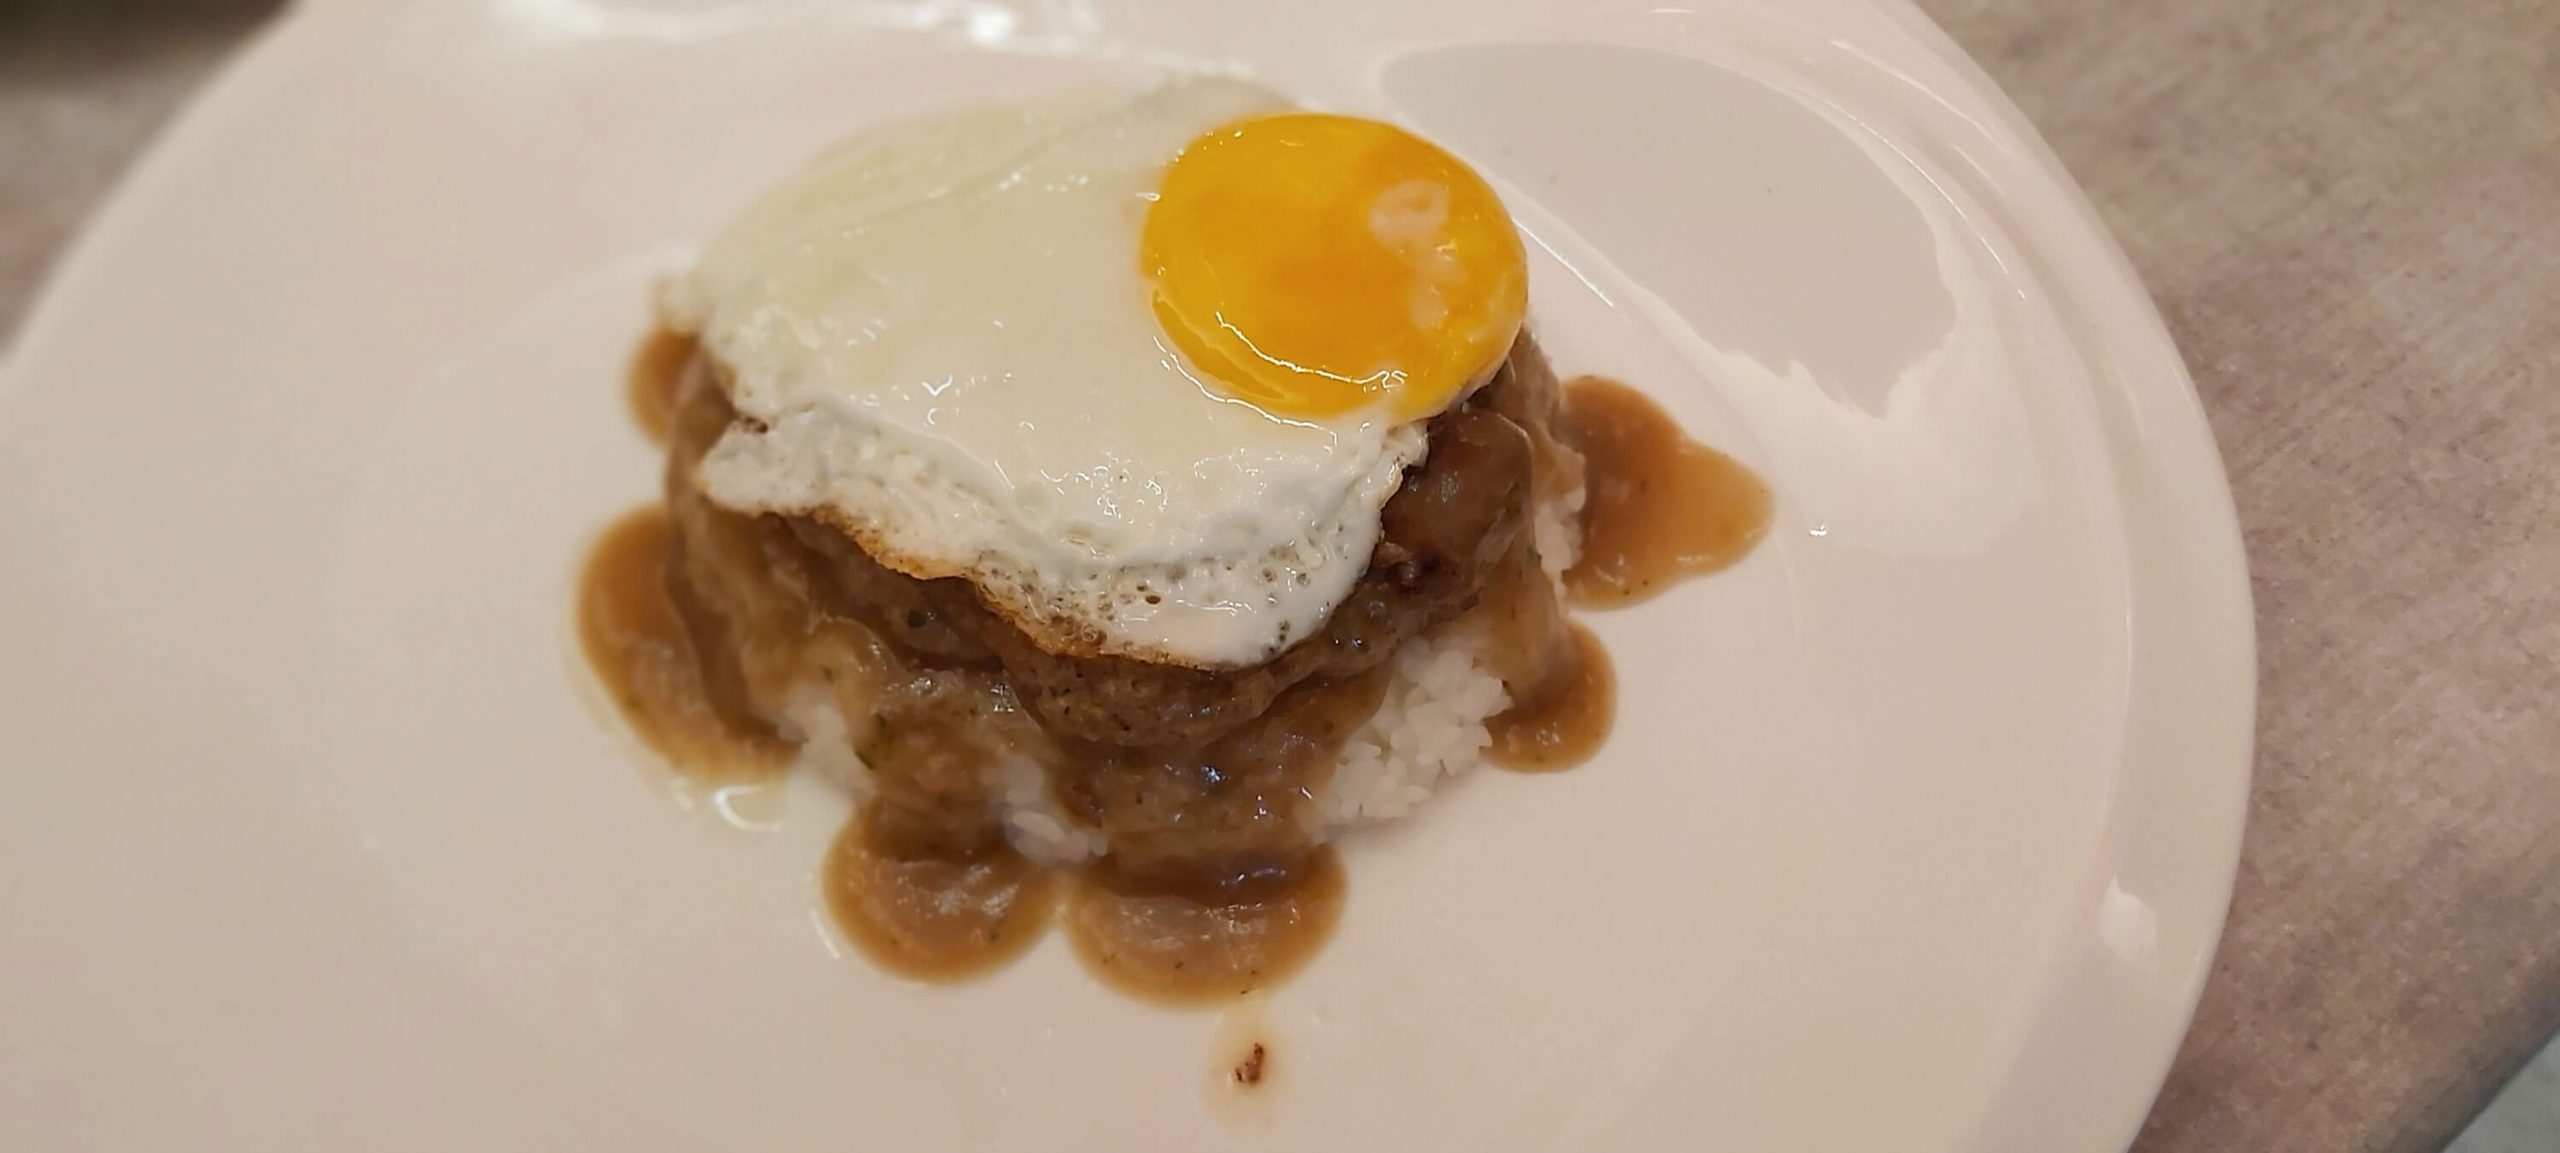 LOCO MOCO. This is Hawaiian-style burger steak served on a bed of Japanese white rice with brown gravy and egg.